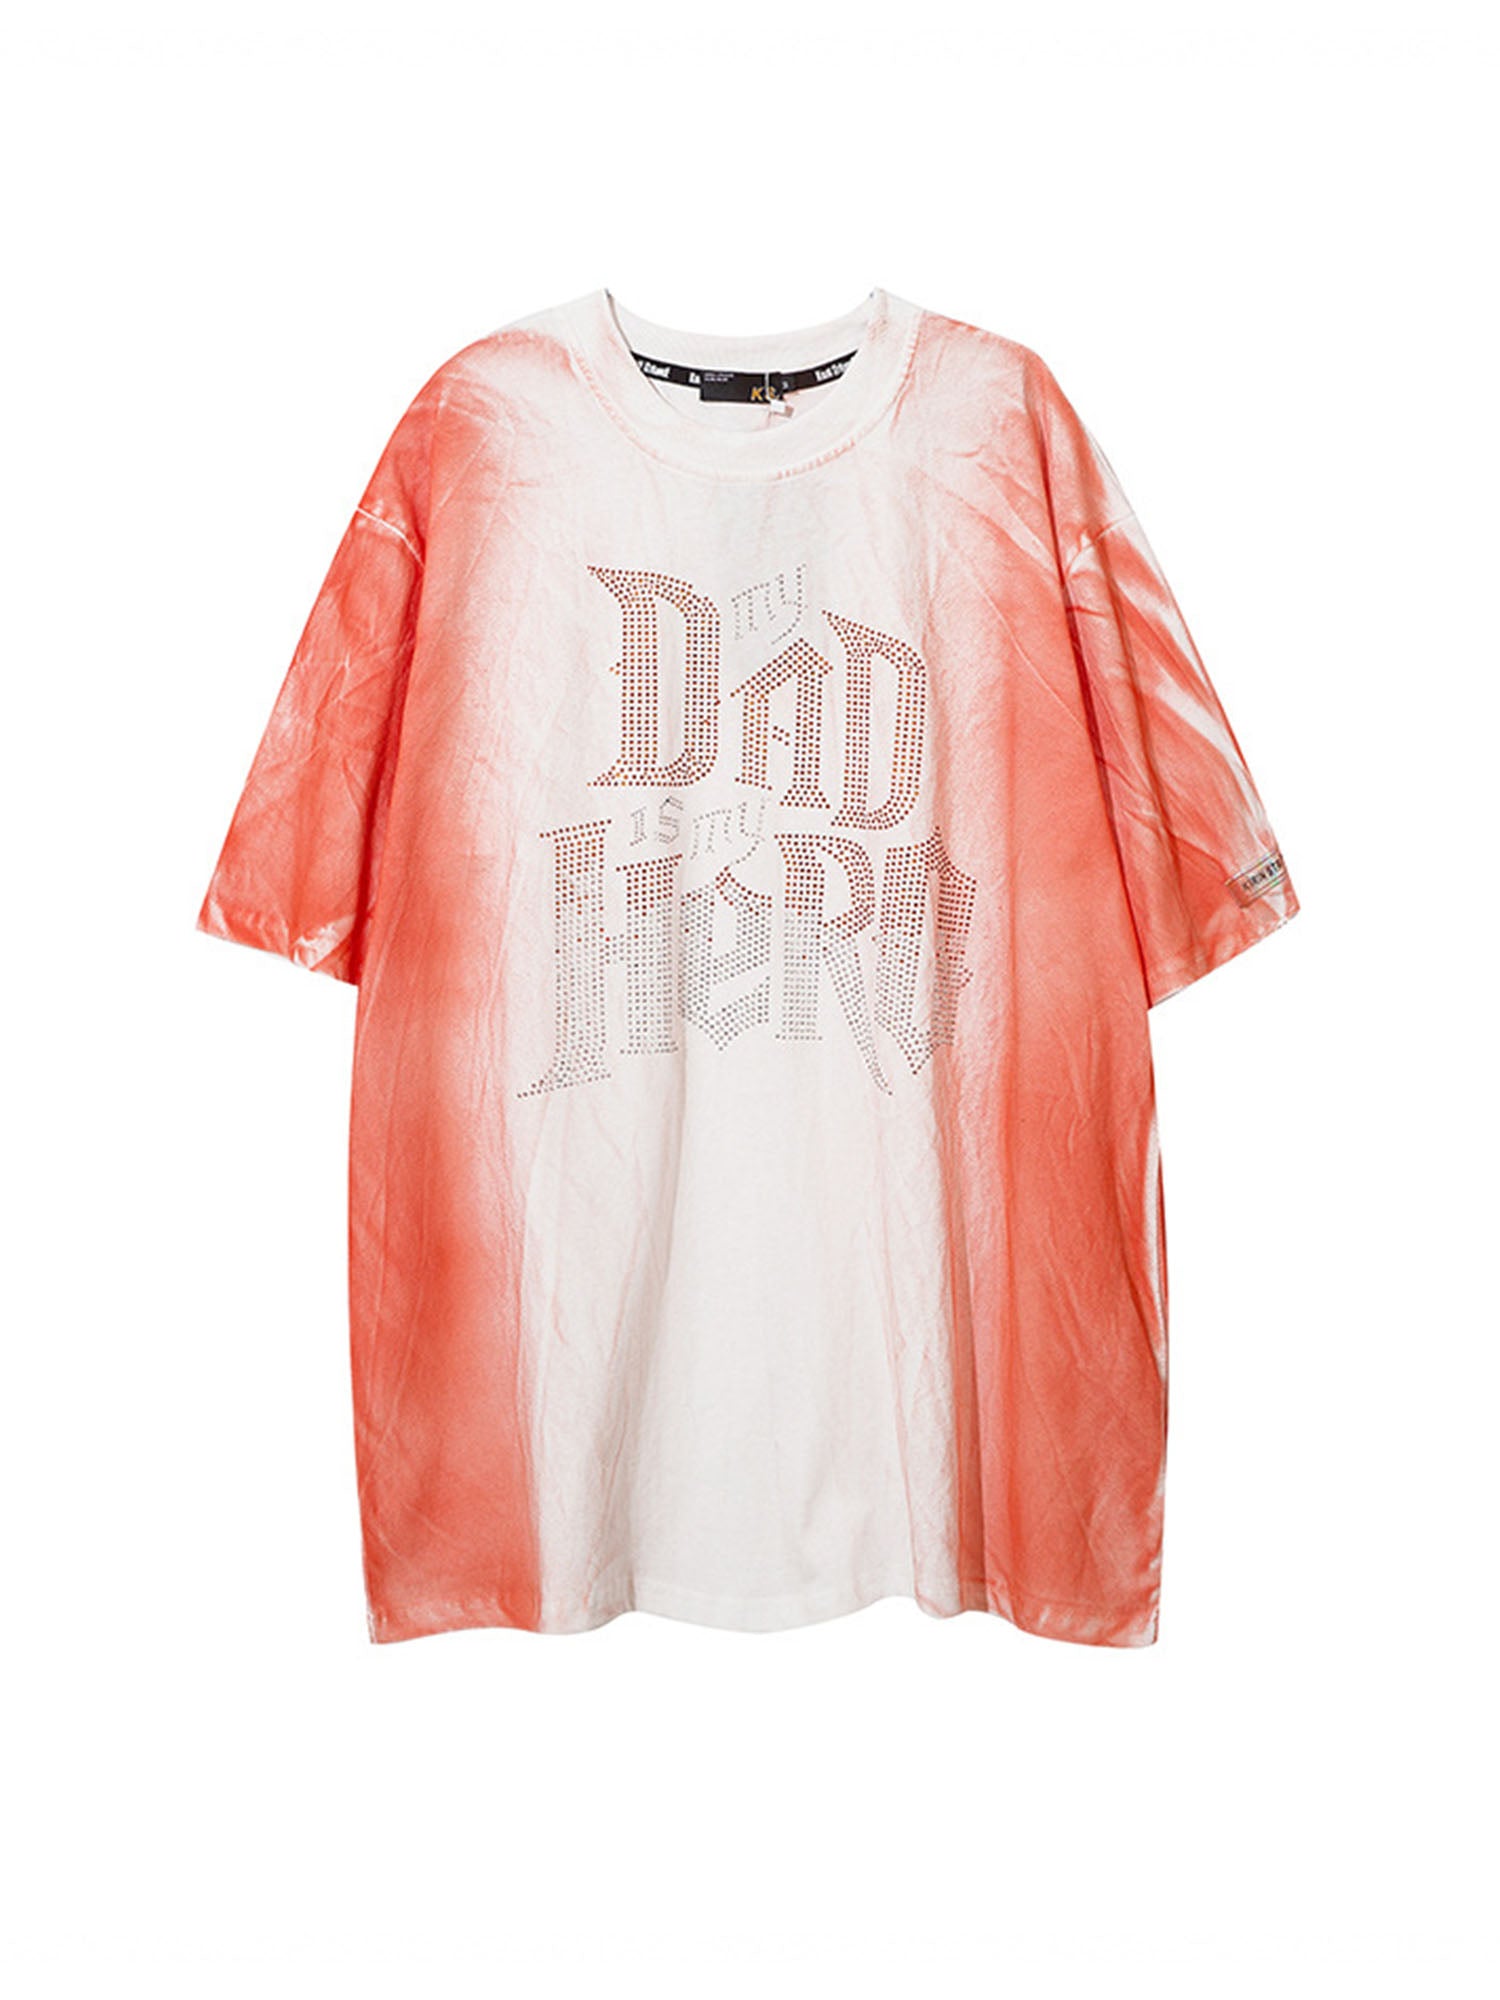 JUSTNOTAG Letter Ironed Drill Short Sleeve Tee